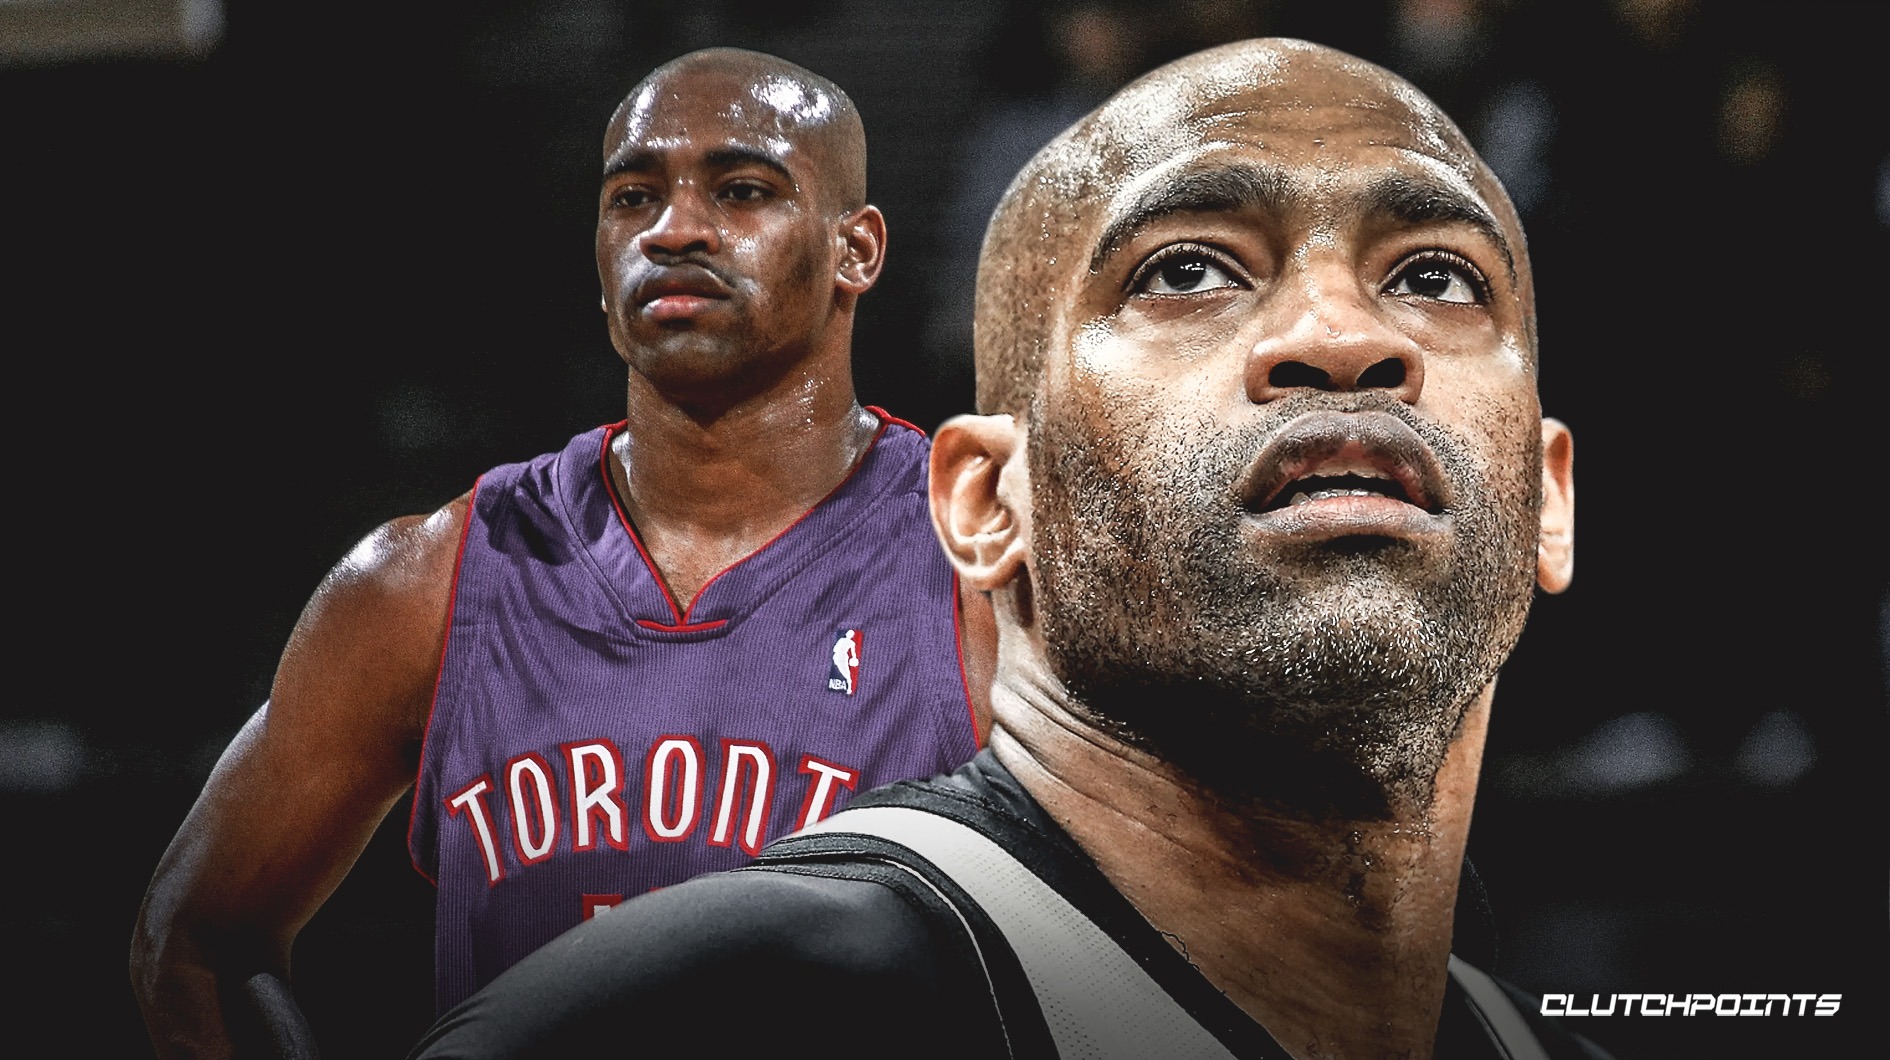 Vince Carter speaks on possibility of returning to Toronto